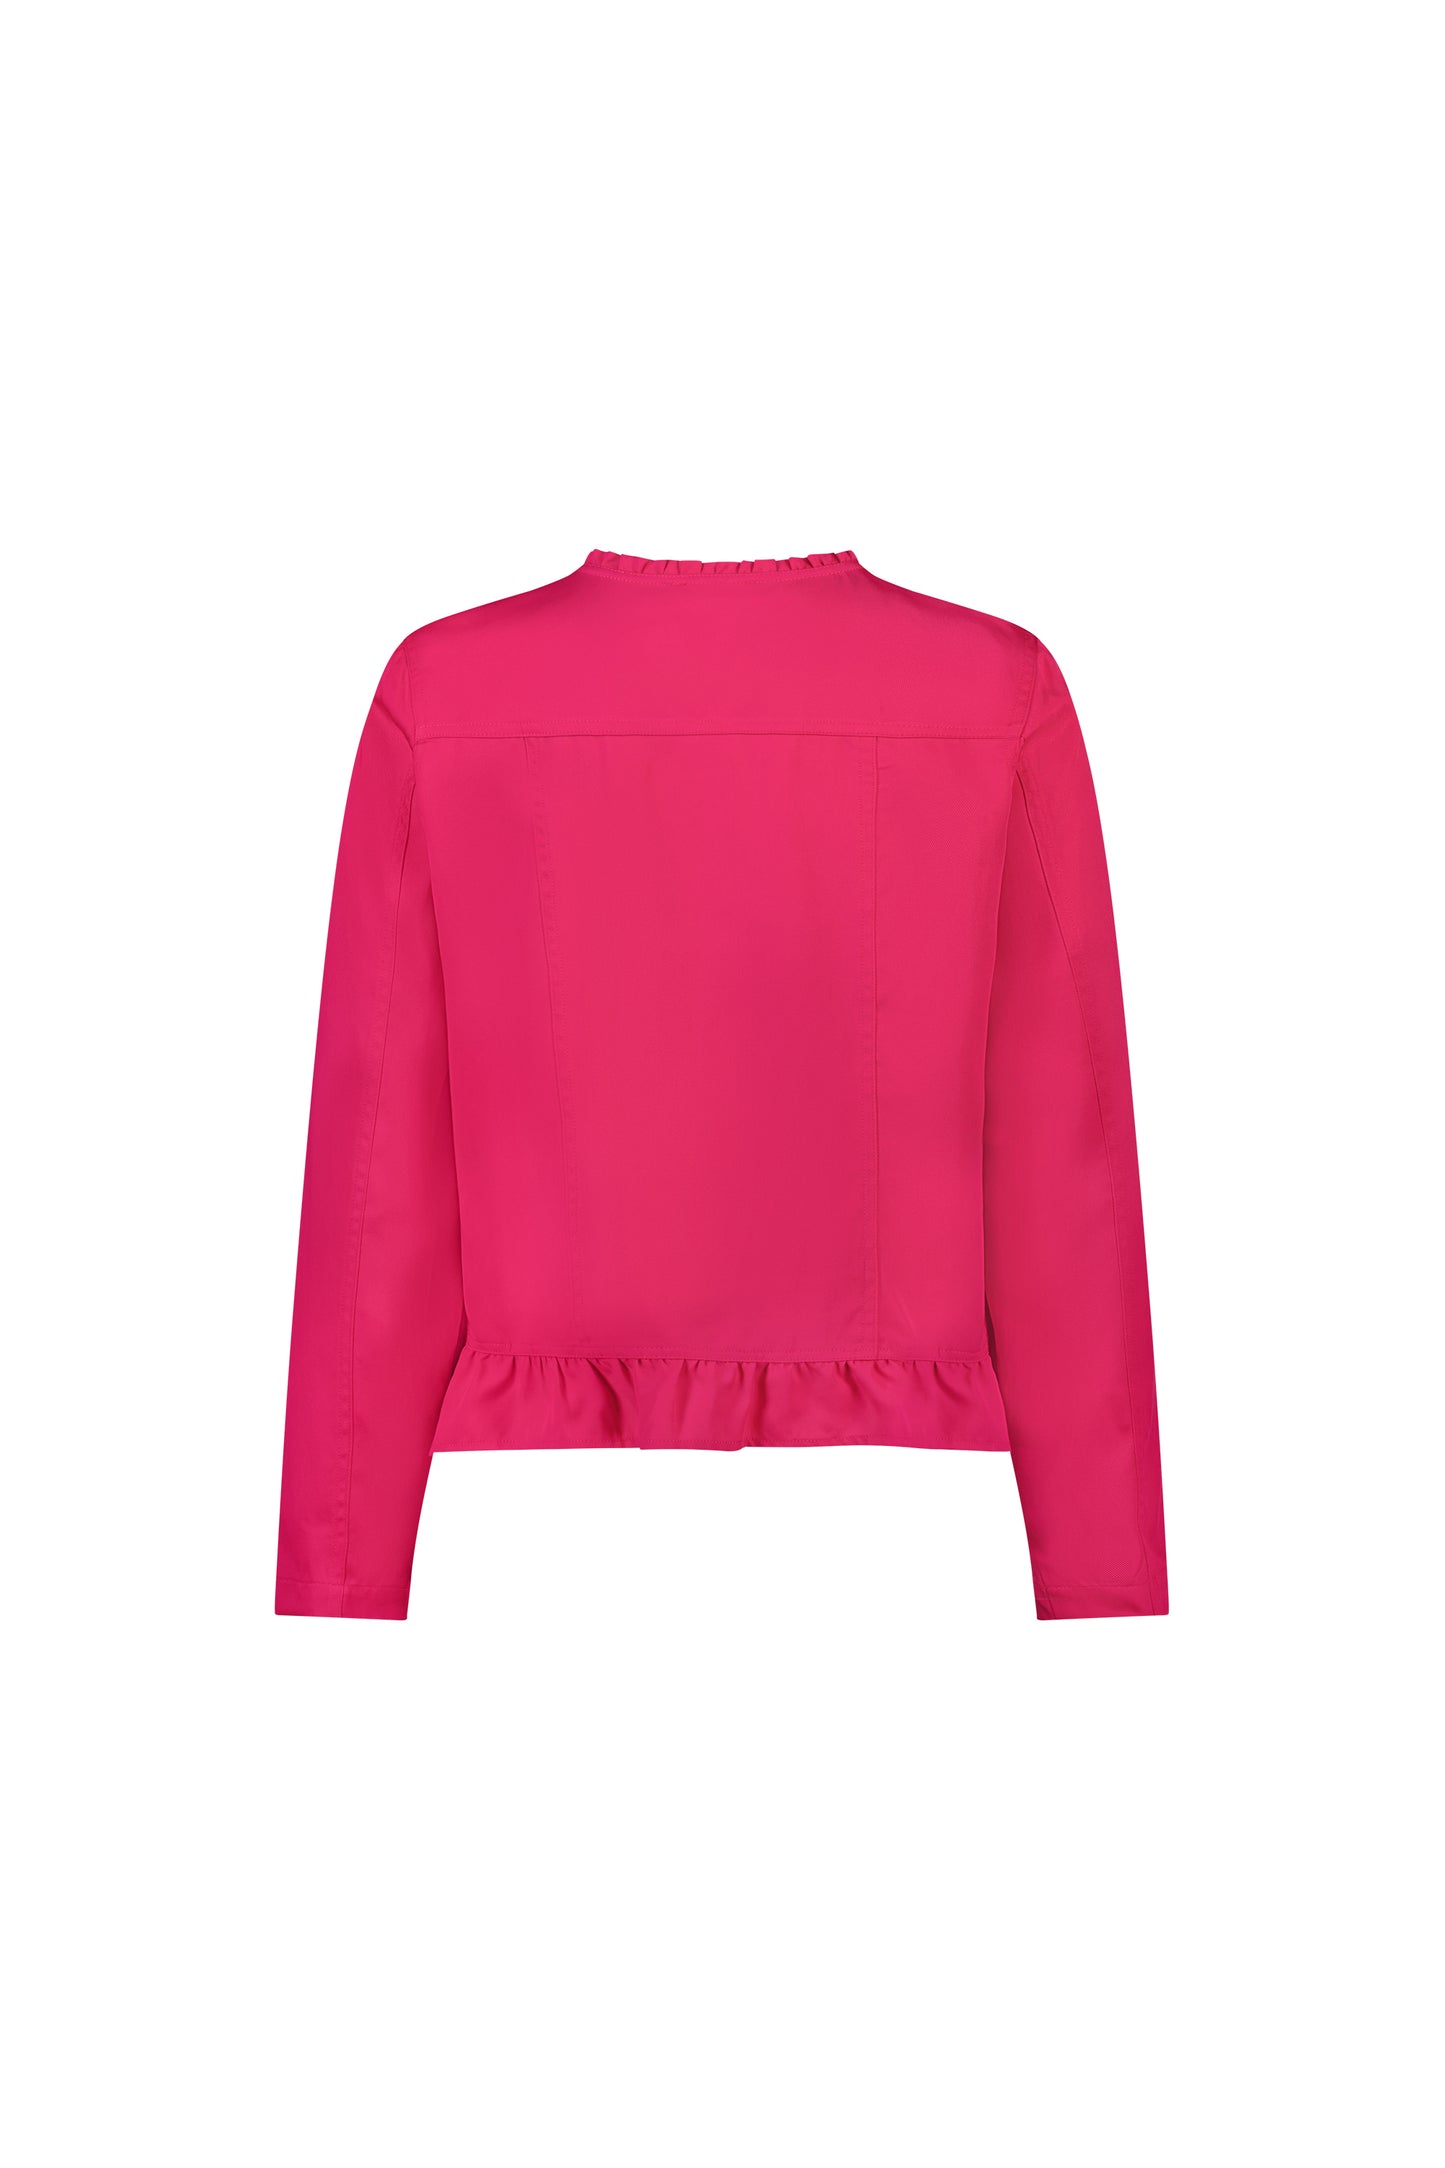 Vassalli - 2047N - Tencel Jacket with Frill Hem - 2 Colours - 50% Off - Cerise and Green only left